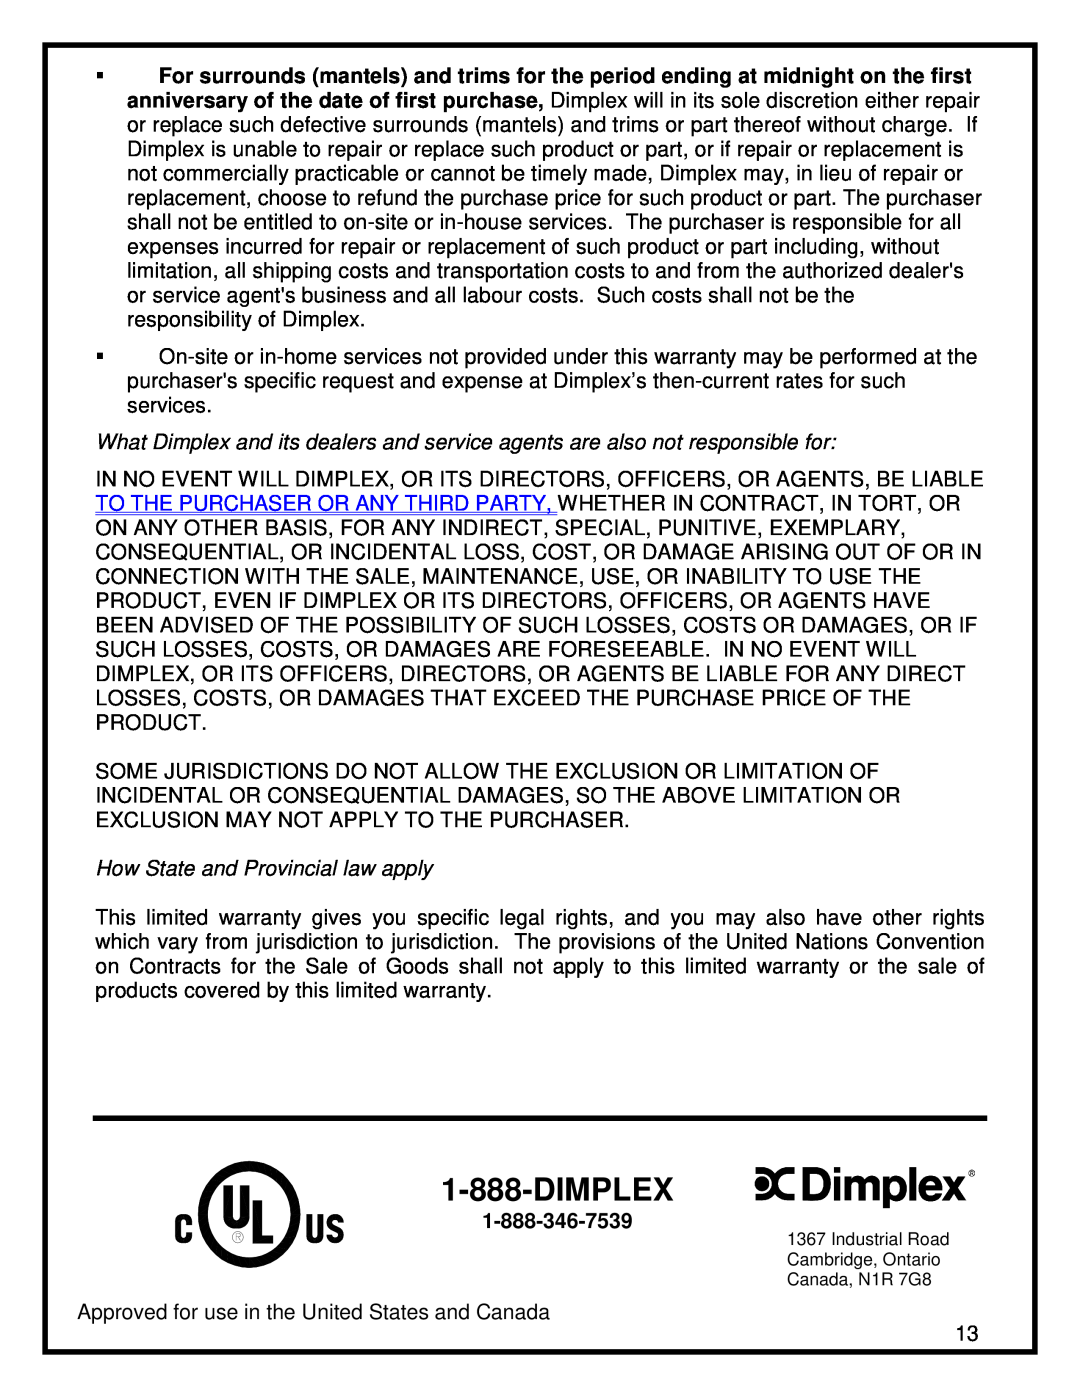 Dimplex 30" FIREPLACE manual Dimplex, How State and Provincial law apply 